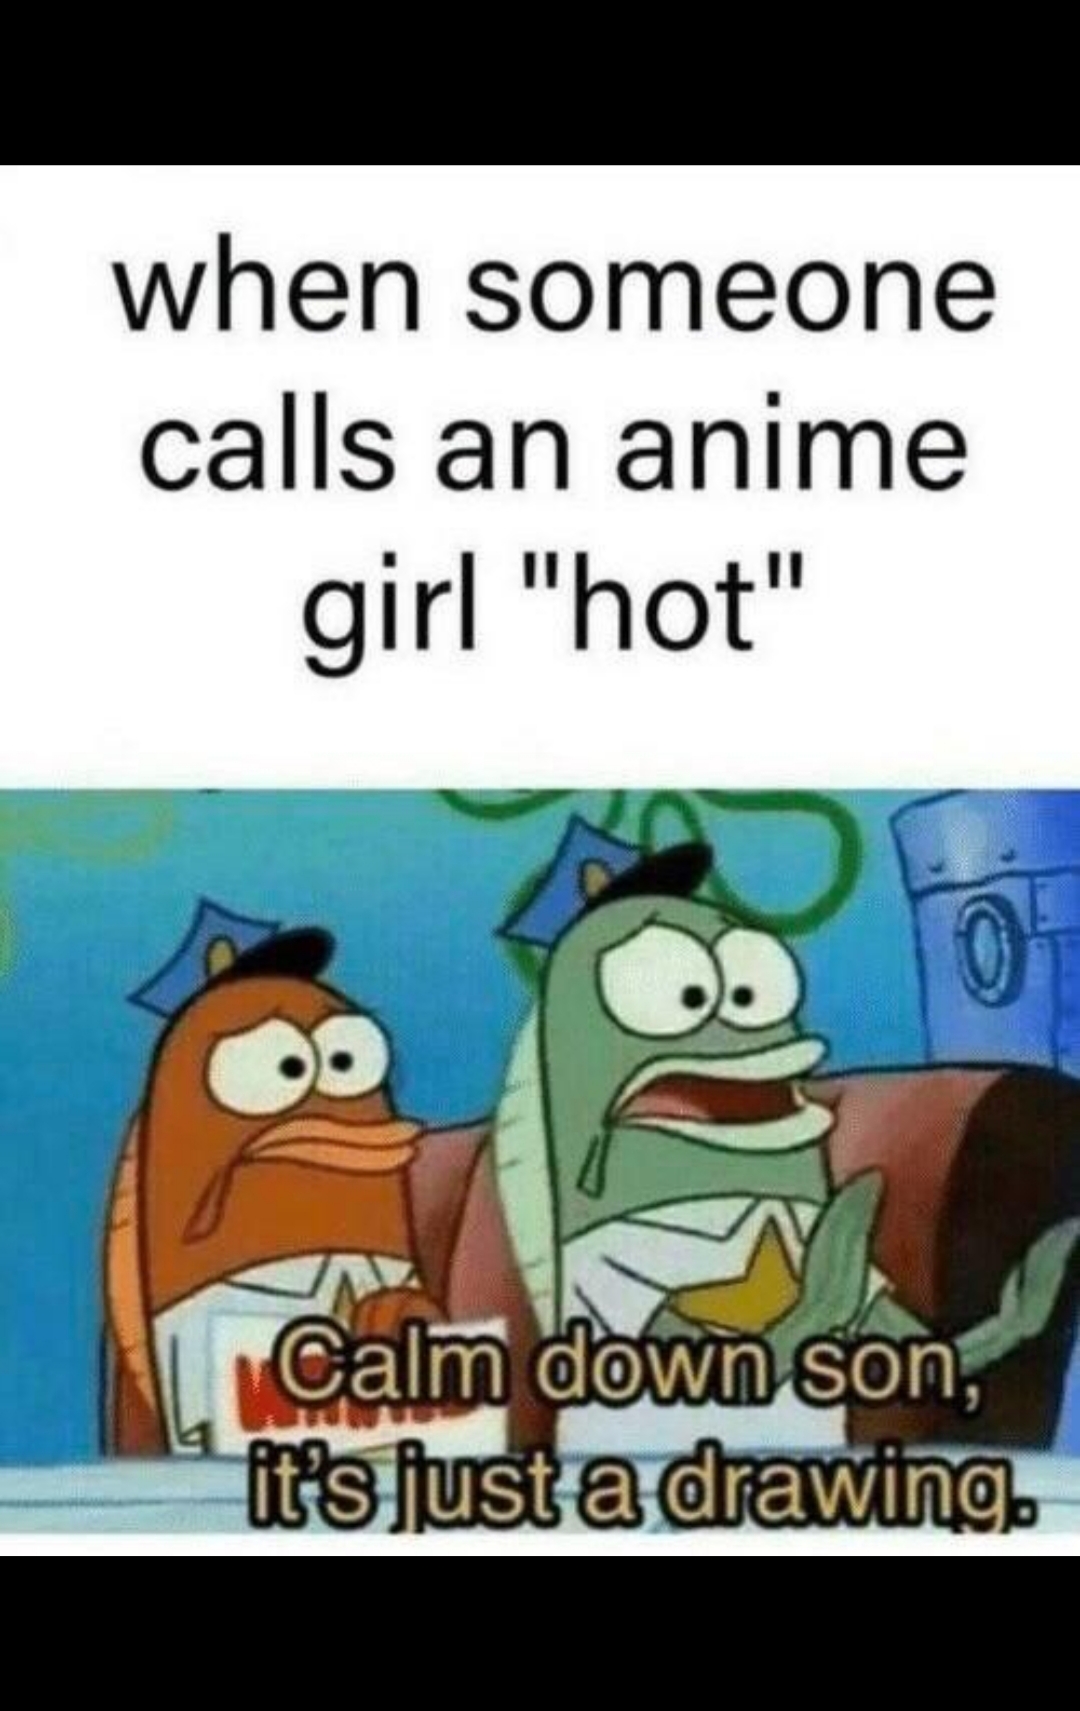 meme of someone calls an anime girl hot meme - when someone calls an anime girl "hot" Calm down son, it's just a drawing.